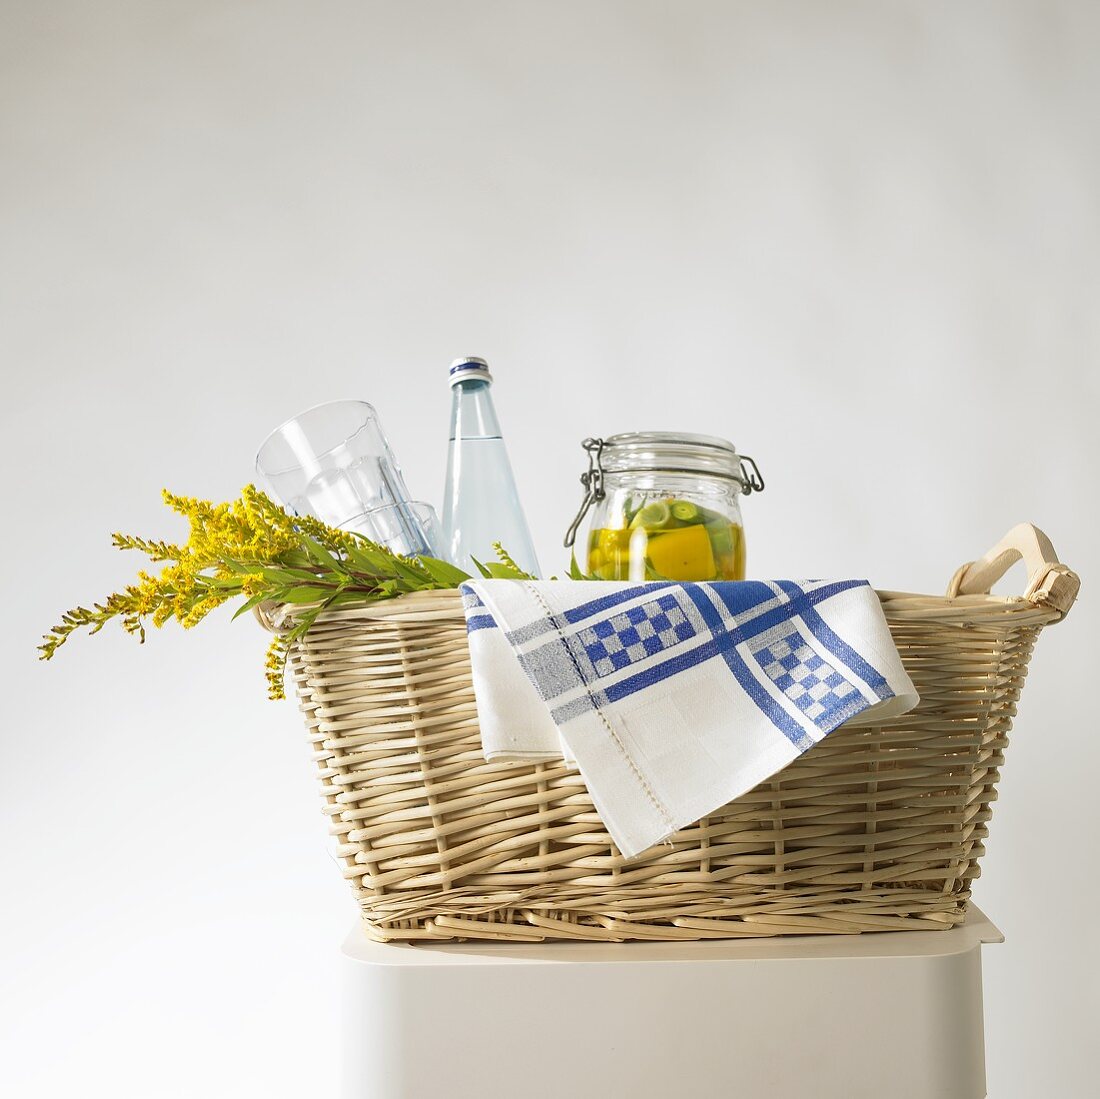 Pickled vegetables, flowers and a bottle of water in a basket